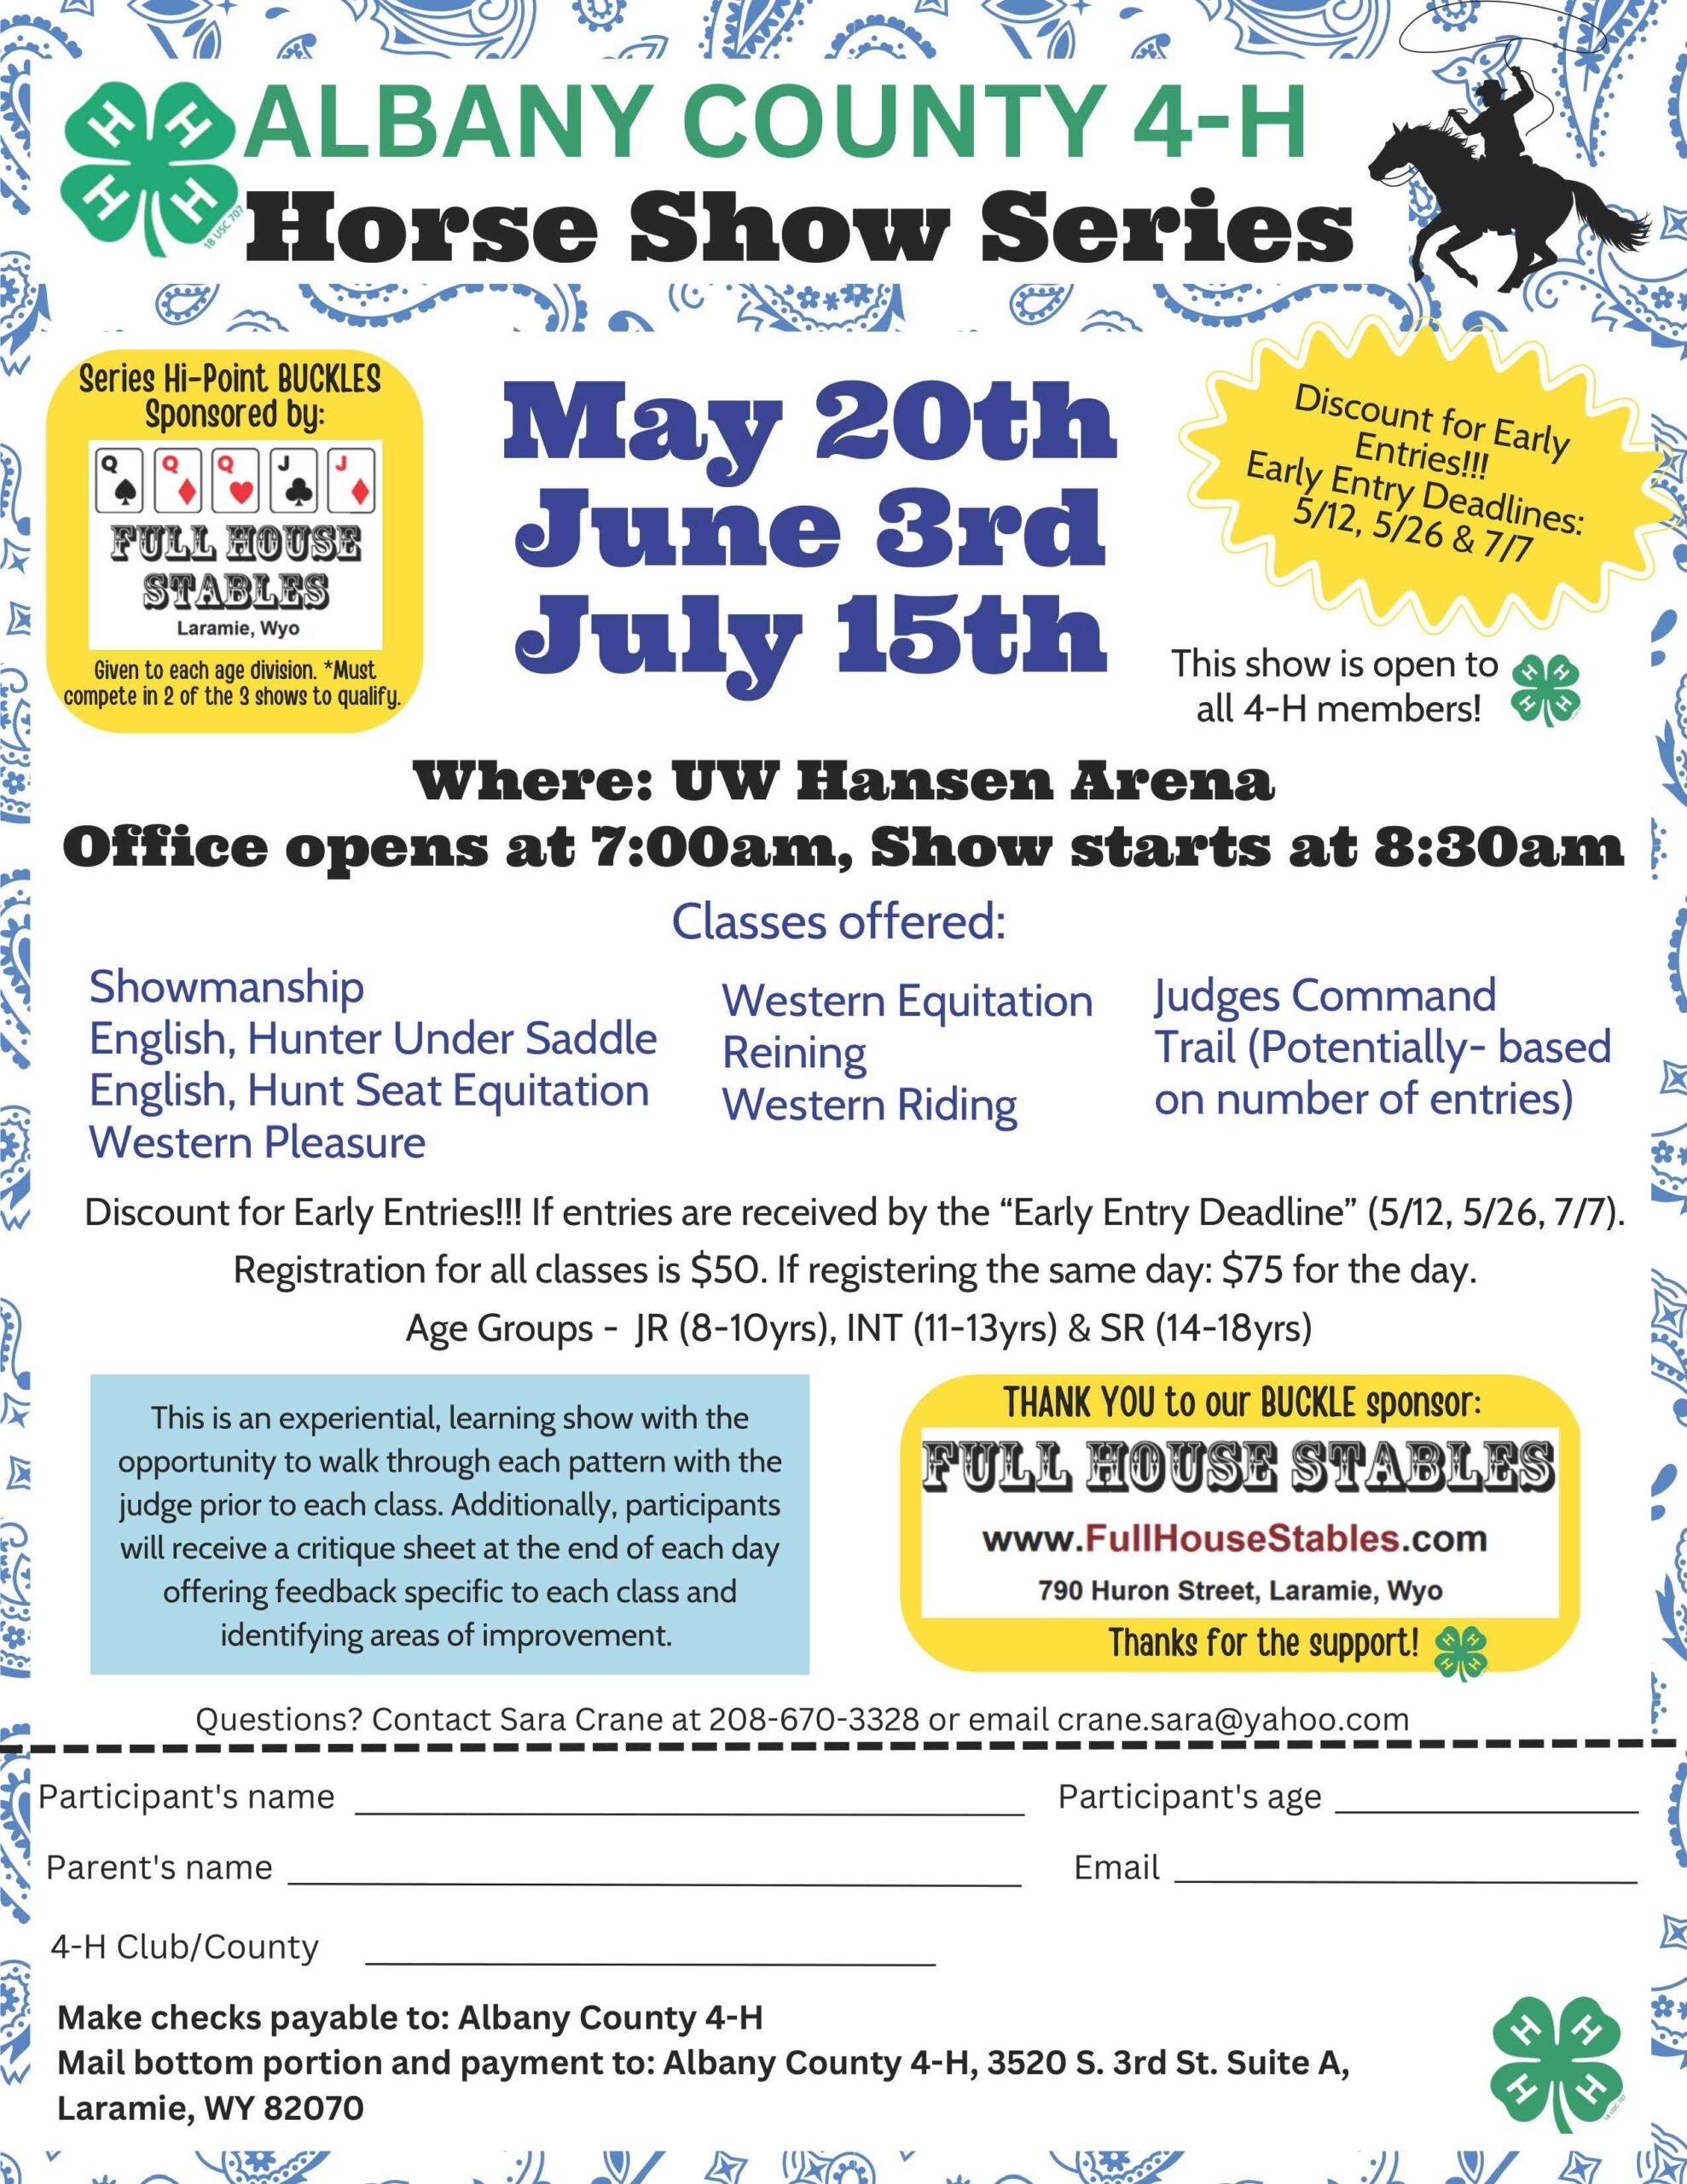 Albany County 4-H Horse Show Series registration and information flyer.